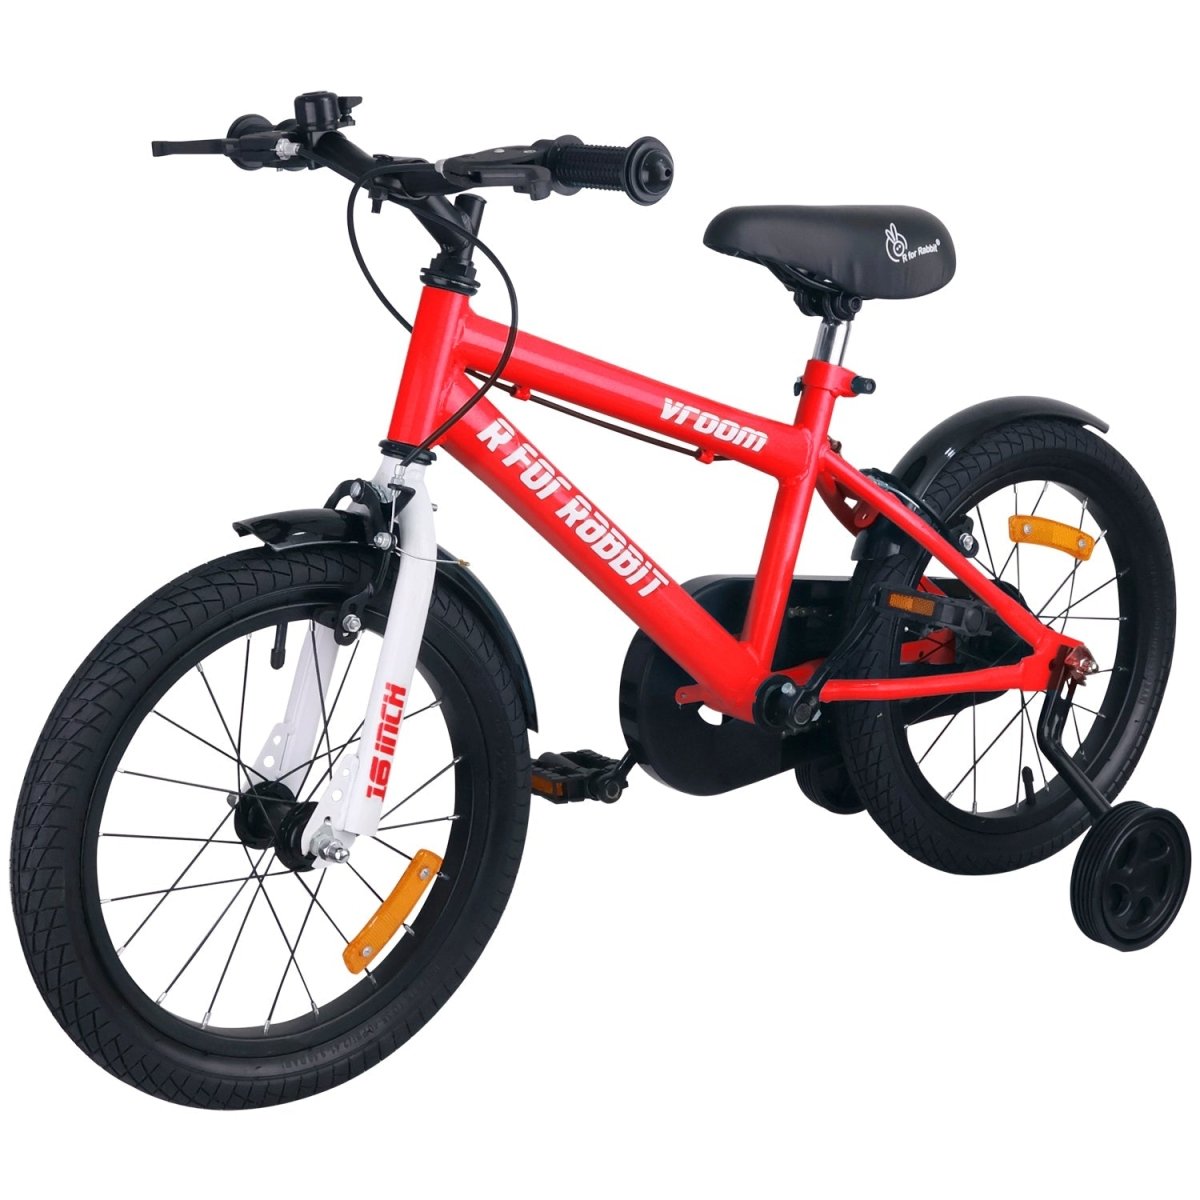 R for Rabbit Vroom Bicycle Red- 16Inch - BLVRRD16